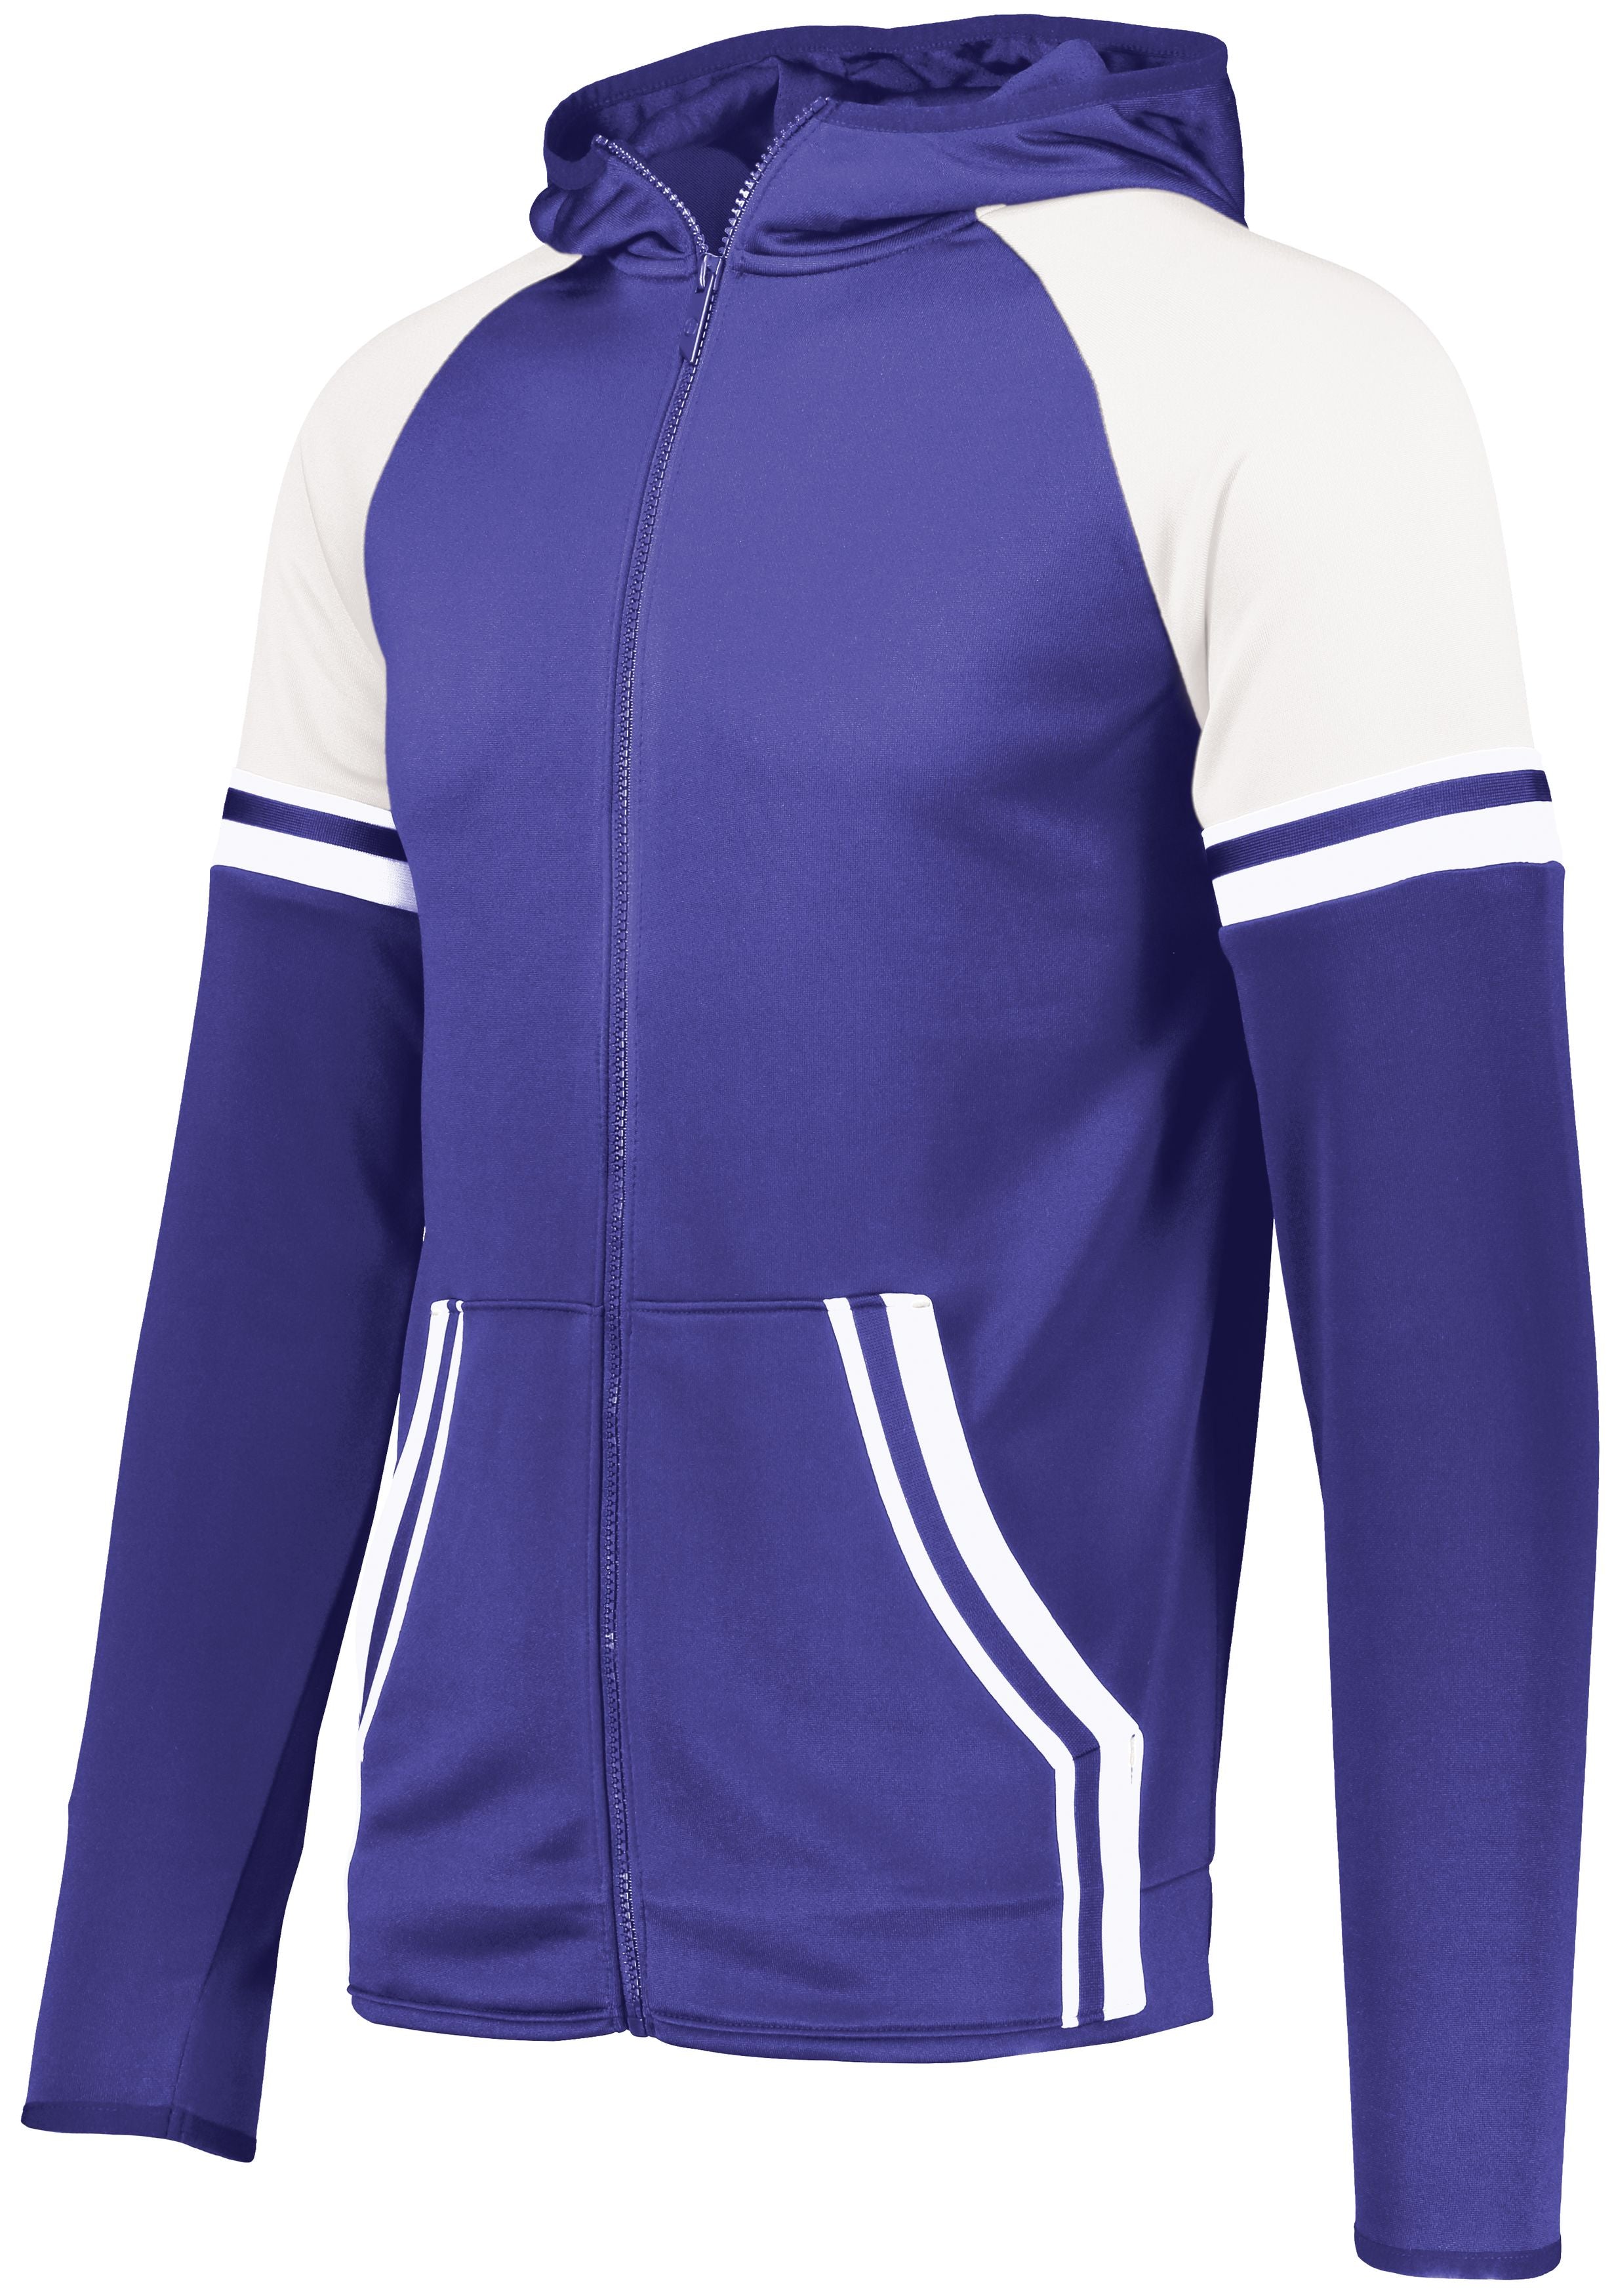 Holloway Retro Grade Jacket in Purple/White  -Part of the Adult, Adult-Jacket, Holloway, Outerwear product lines at KanaleyCreations.com